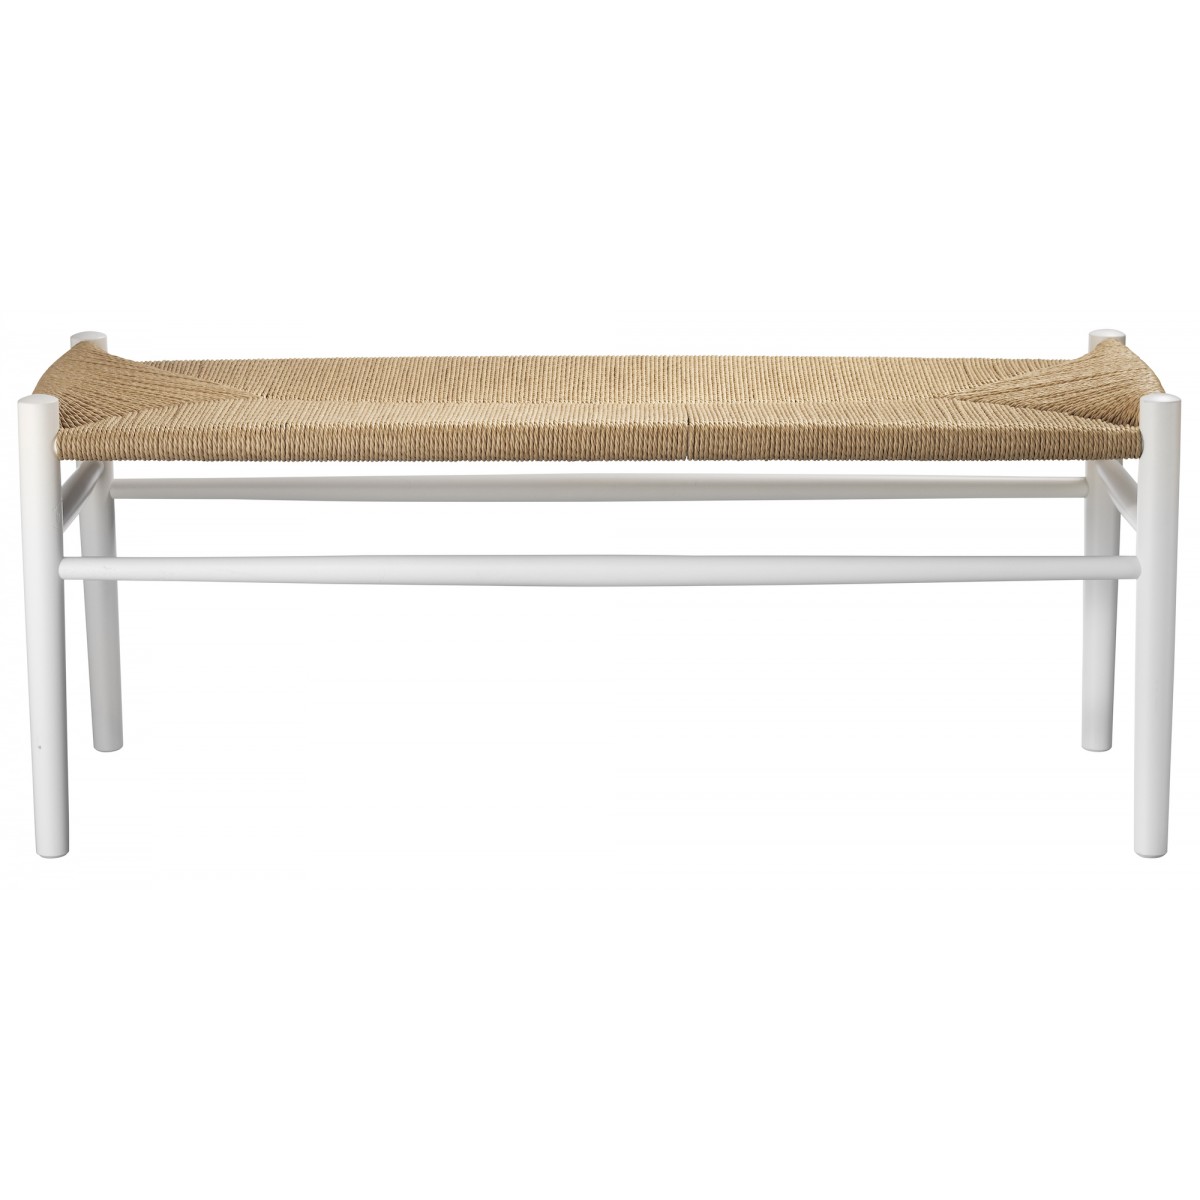 SOLD OUT white beech / natural paper cord - J83B bench